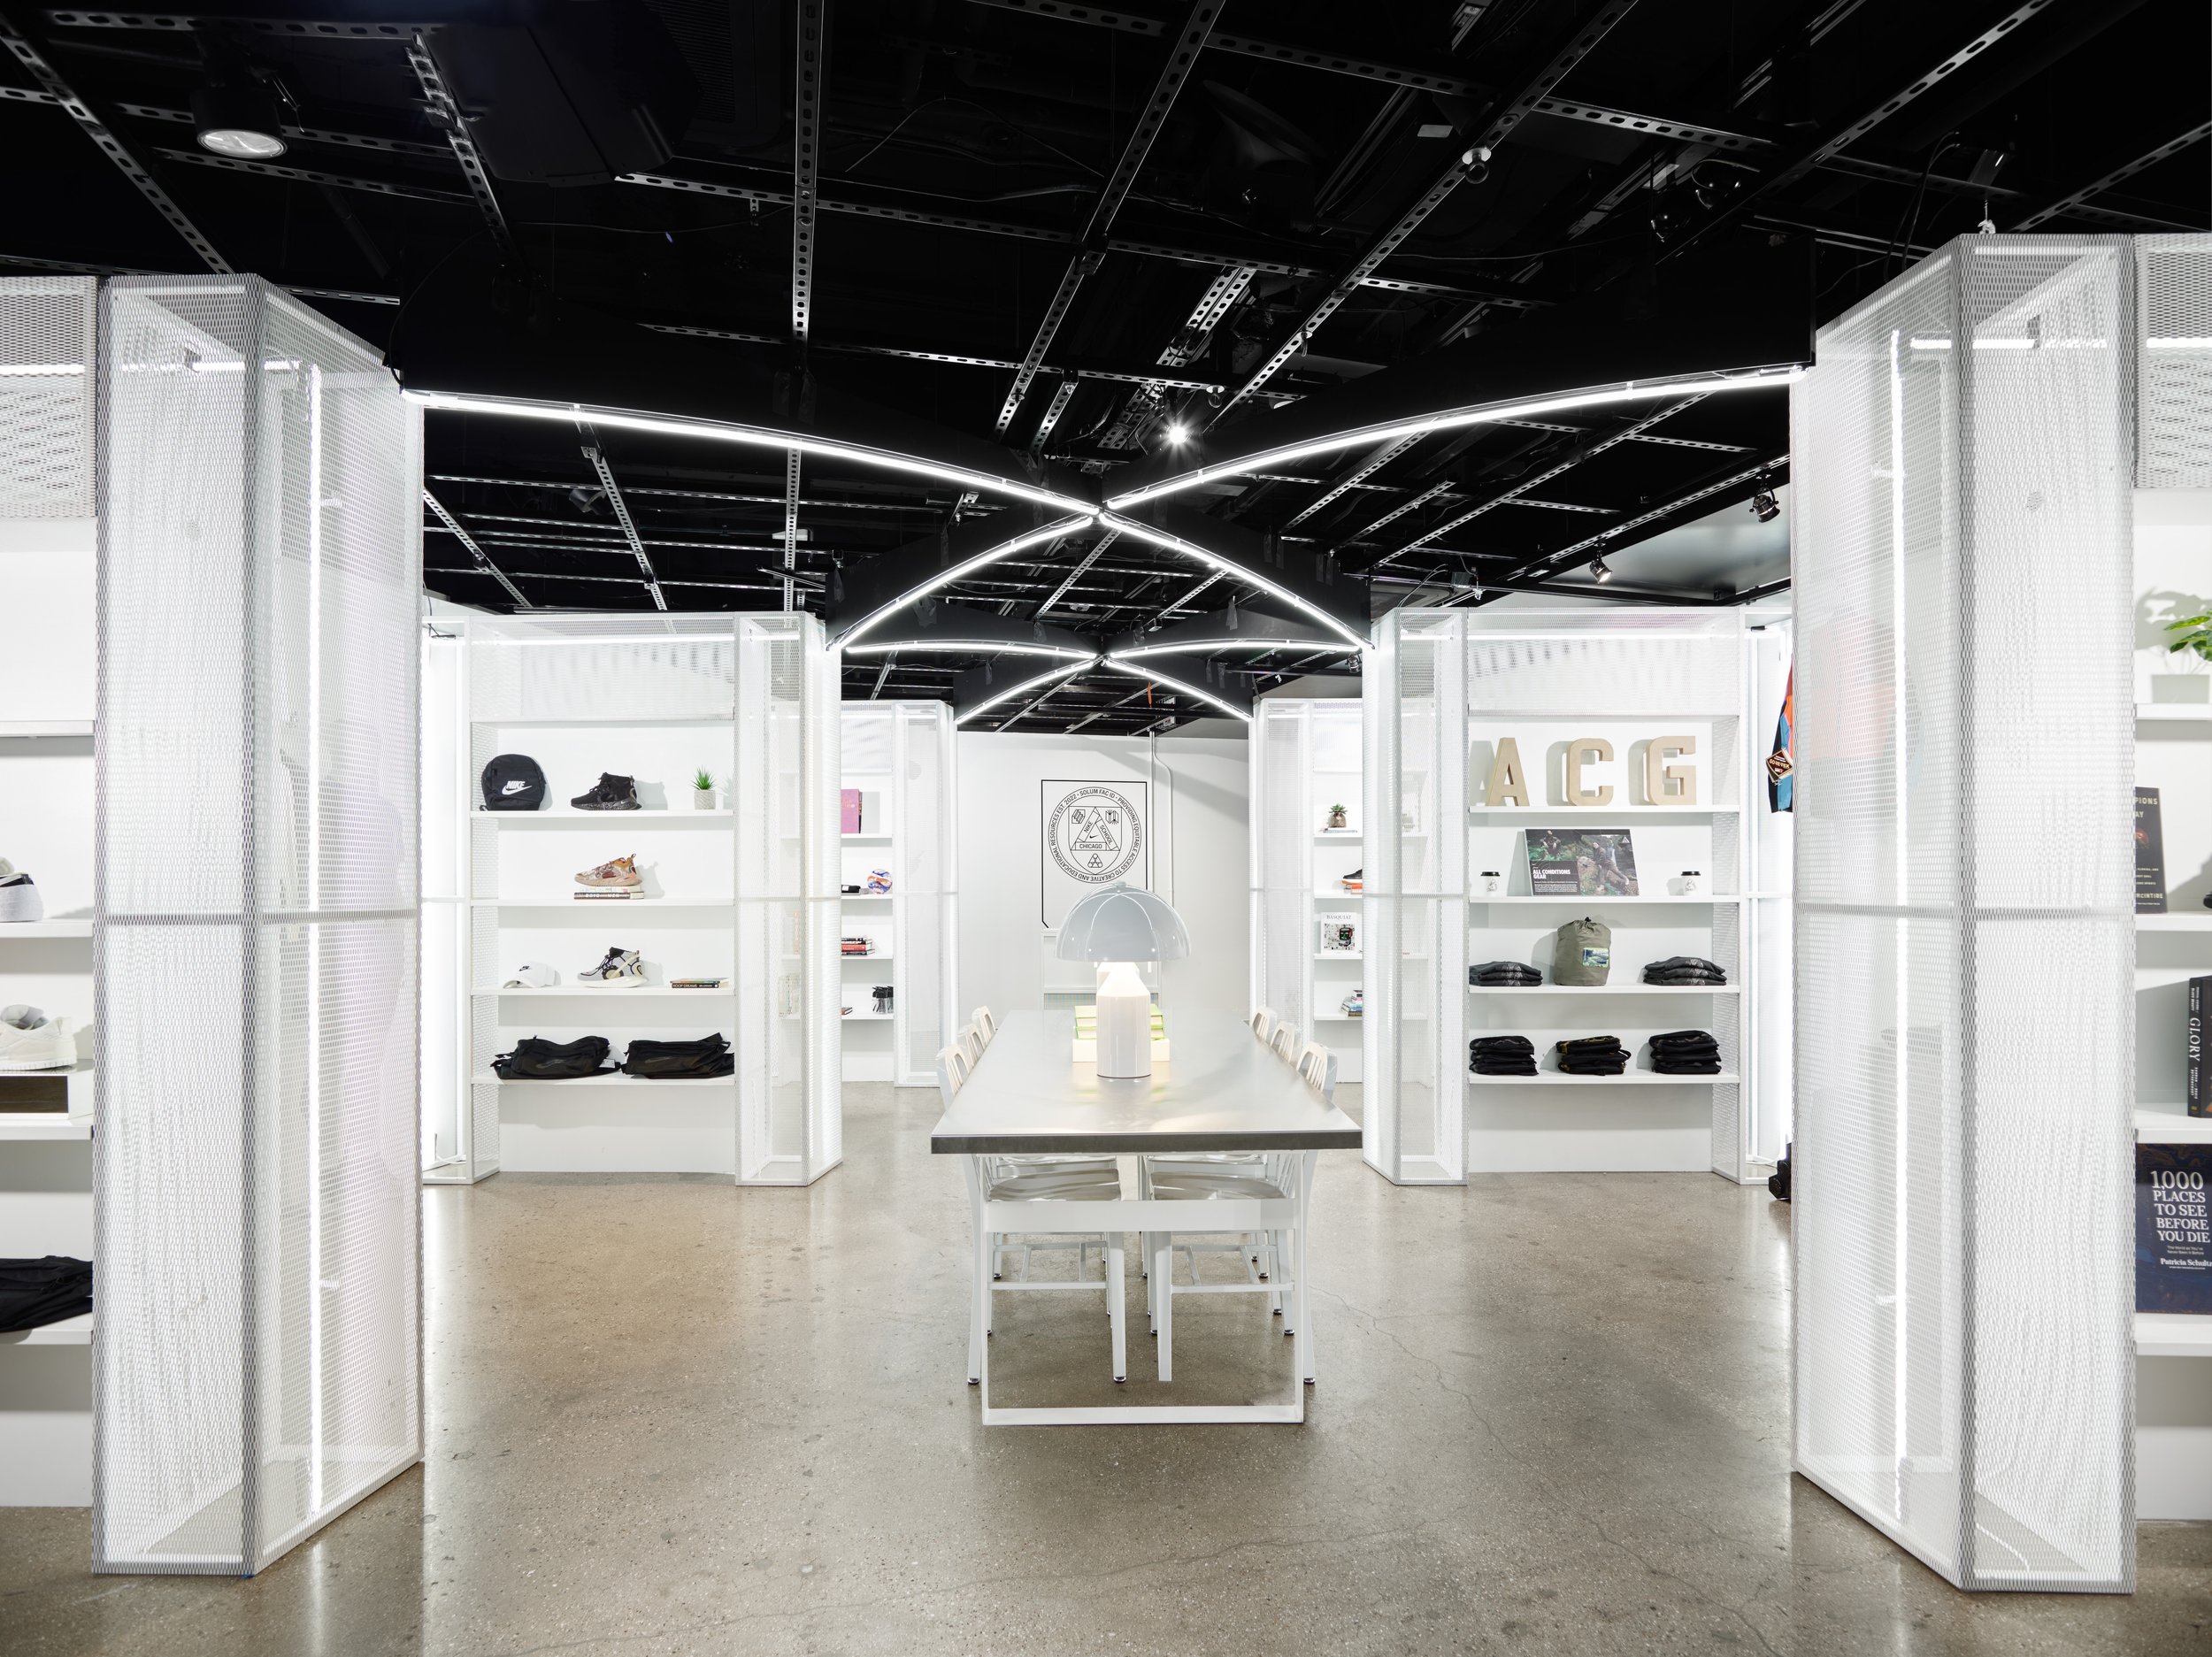  Nike Chicago retail interior architecture photography. Design by  Future Firm  